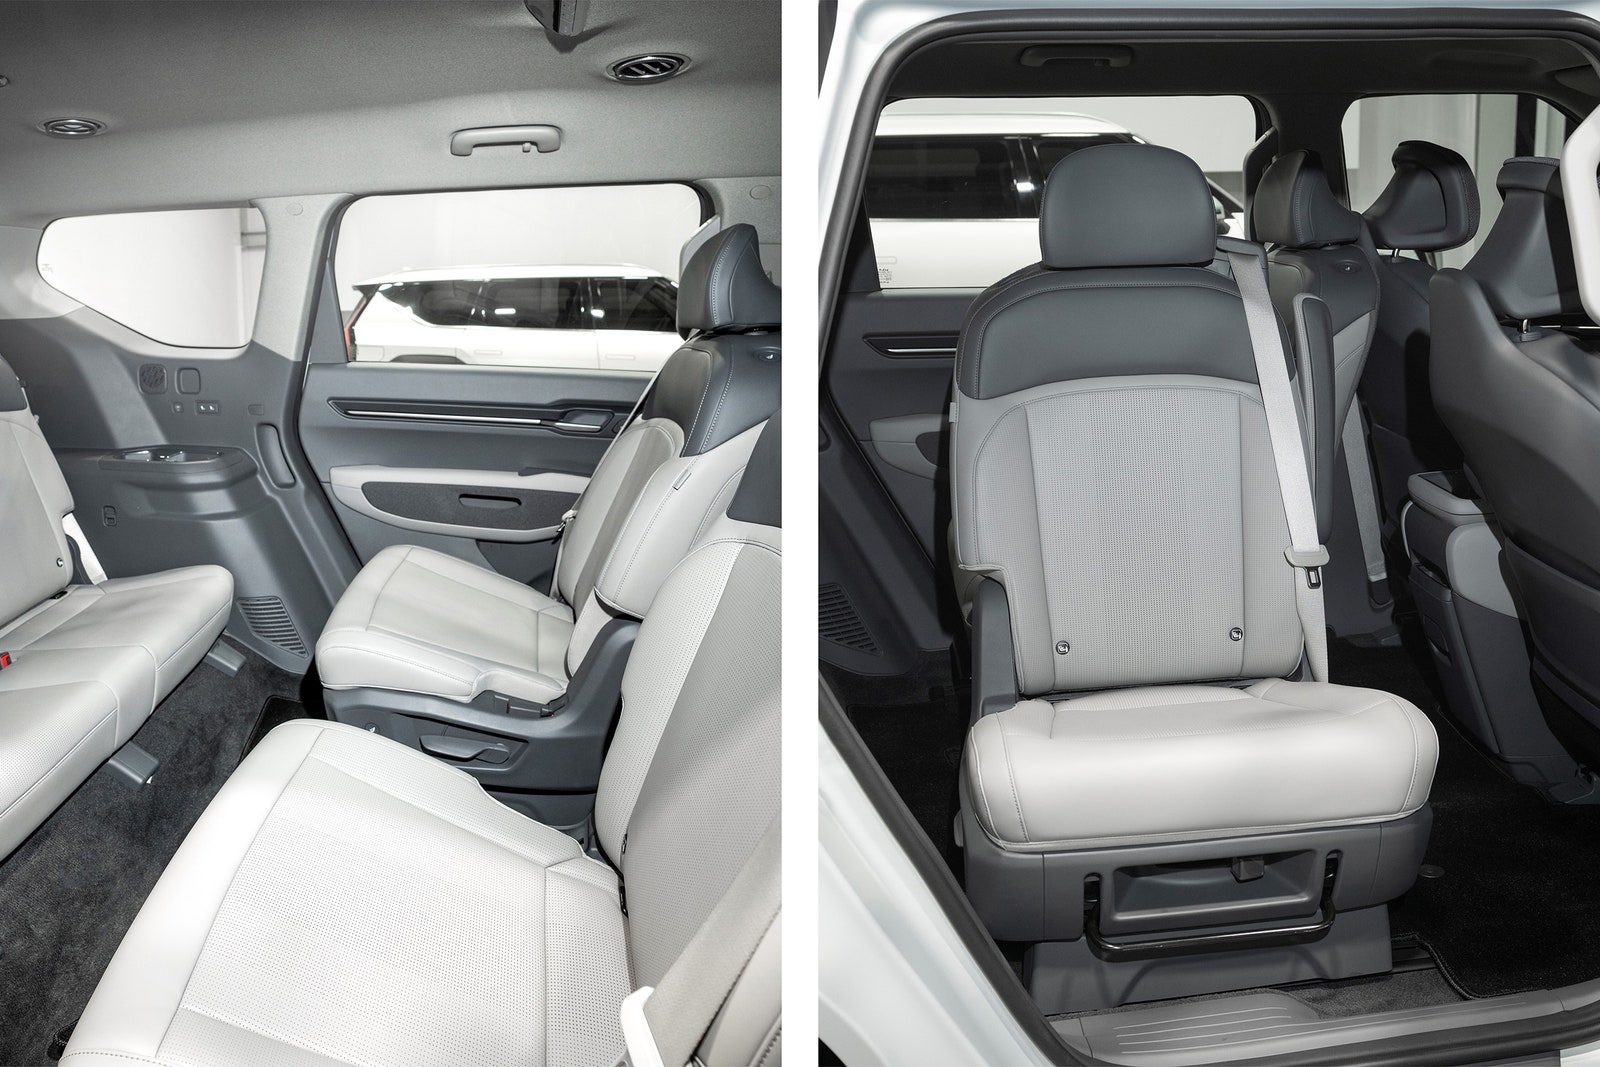 The EV9s seats can swivel so rows face each other or allow easy access to the cabin.